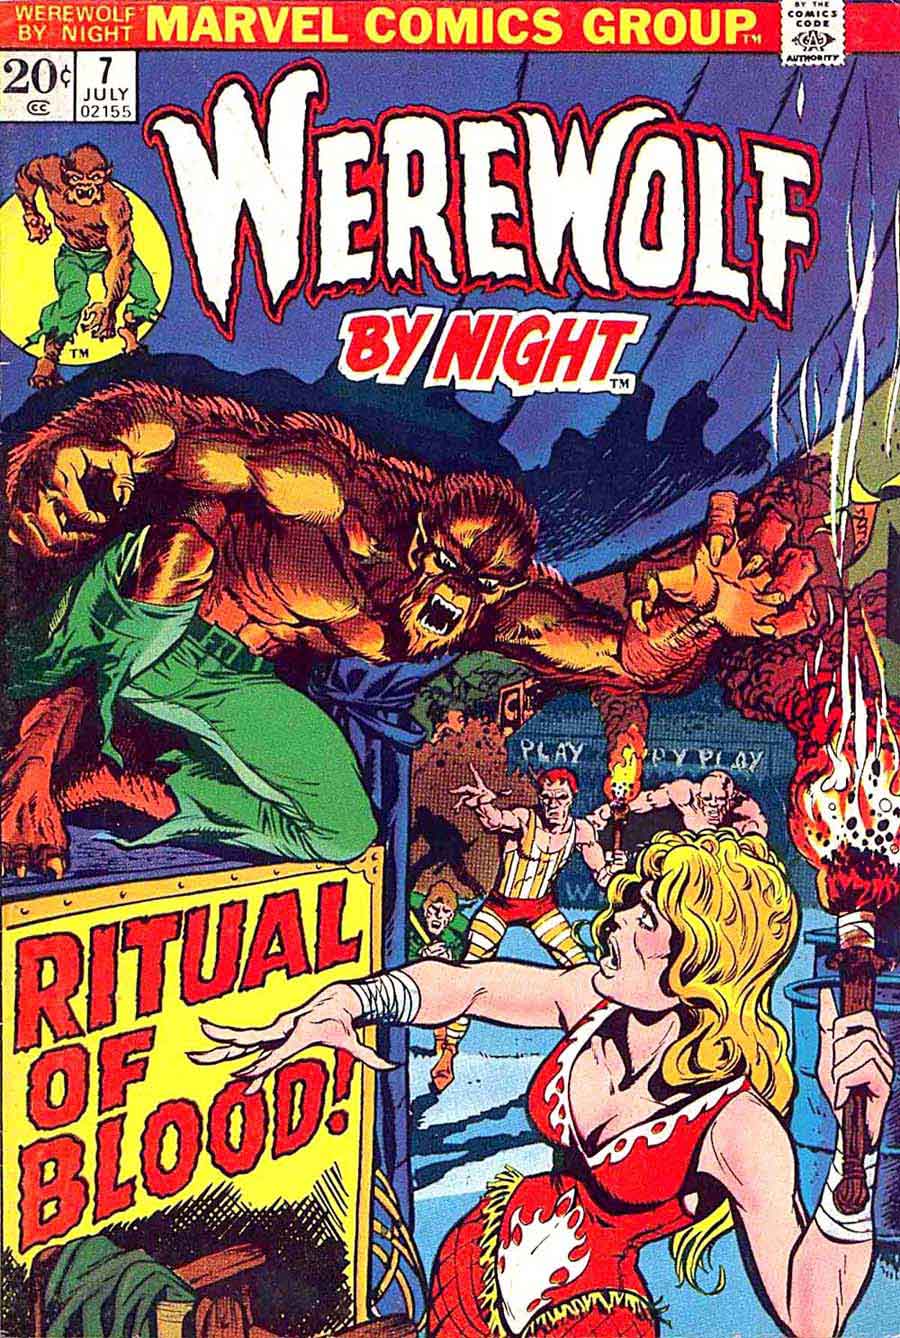 Werewolf by Night v1 #7 1970s marvel comic book cover art by Mike Ploog